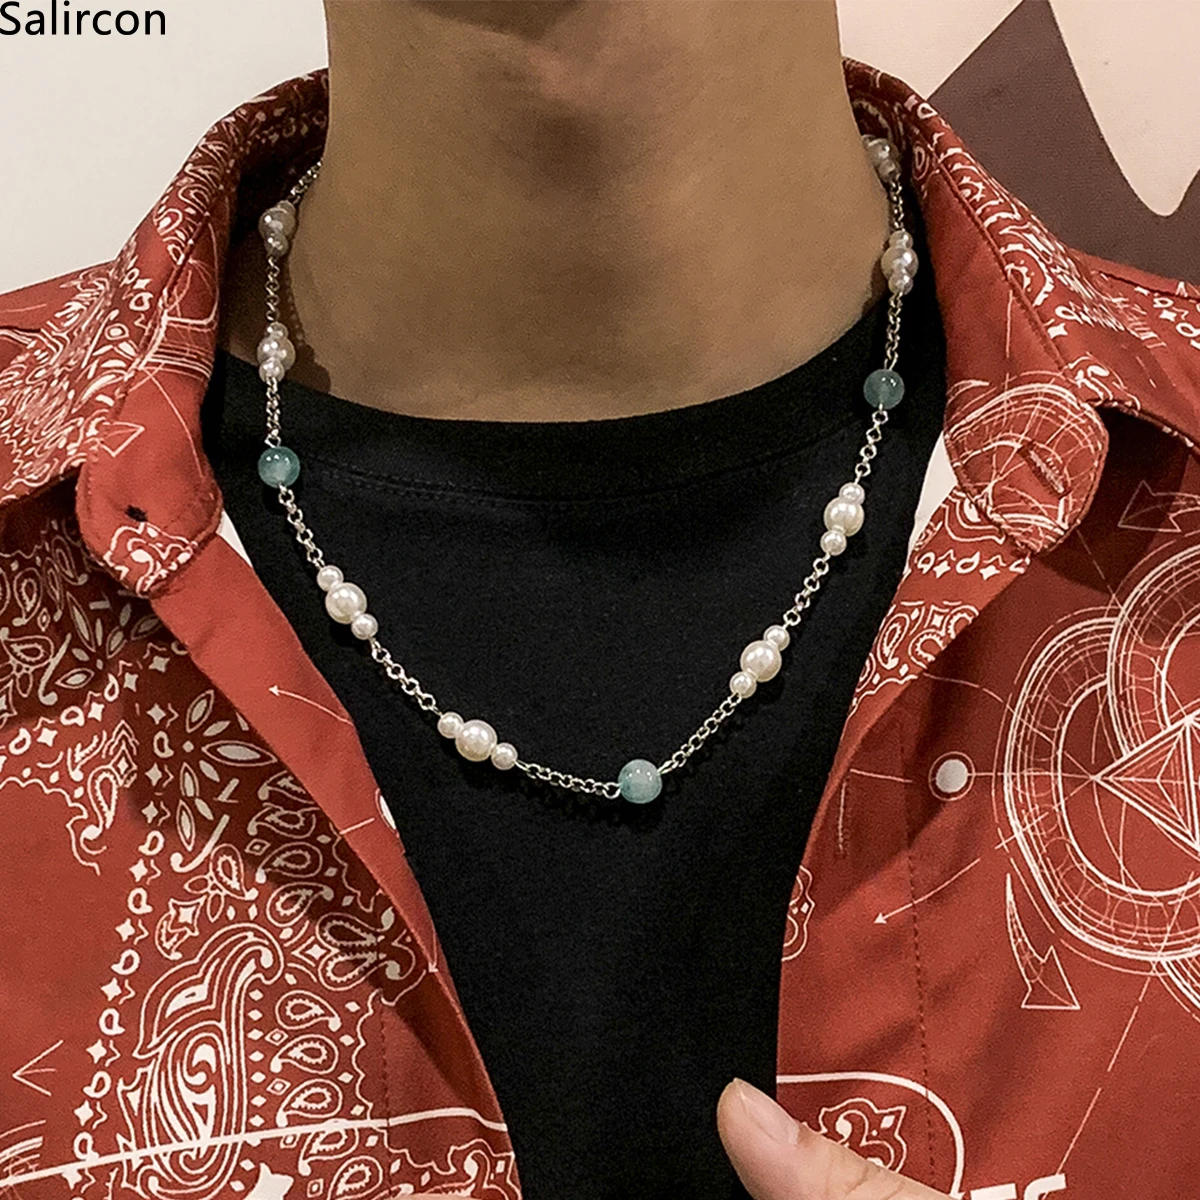 

Men's Hiphop Necklace Simulated Pearls Beads Statement Short Collar Clavicle Chain Necklace For Women New Fashion Jewelry Gifts